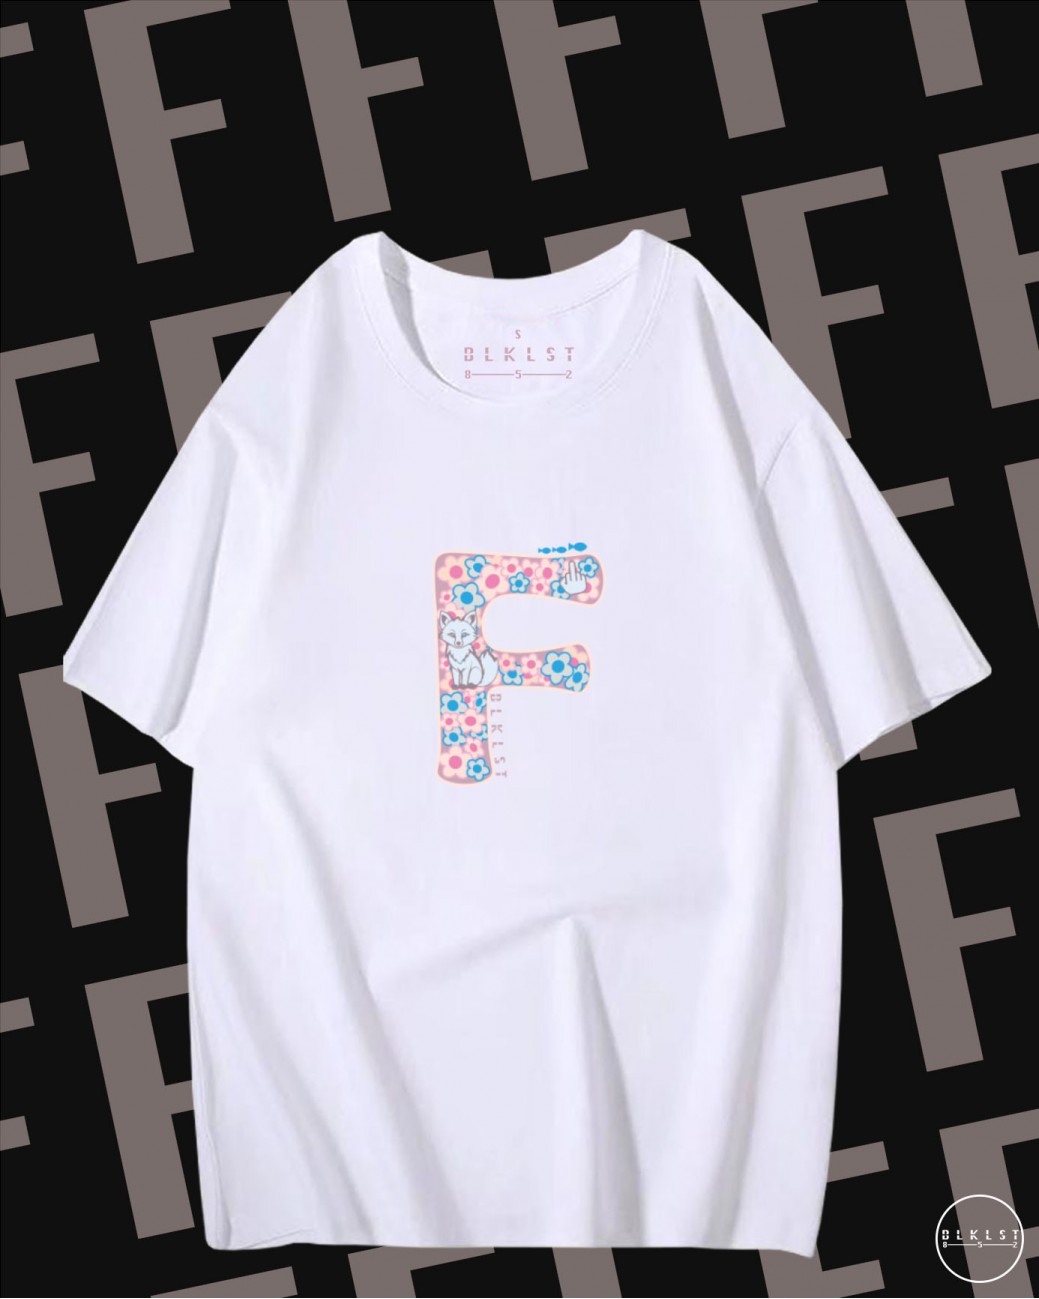 LETTER F TEE